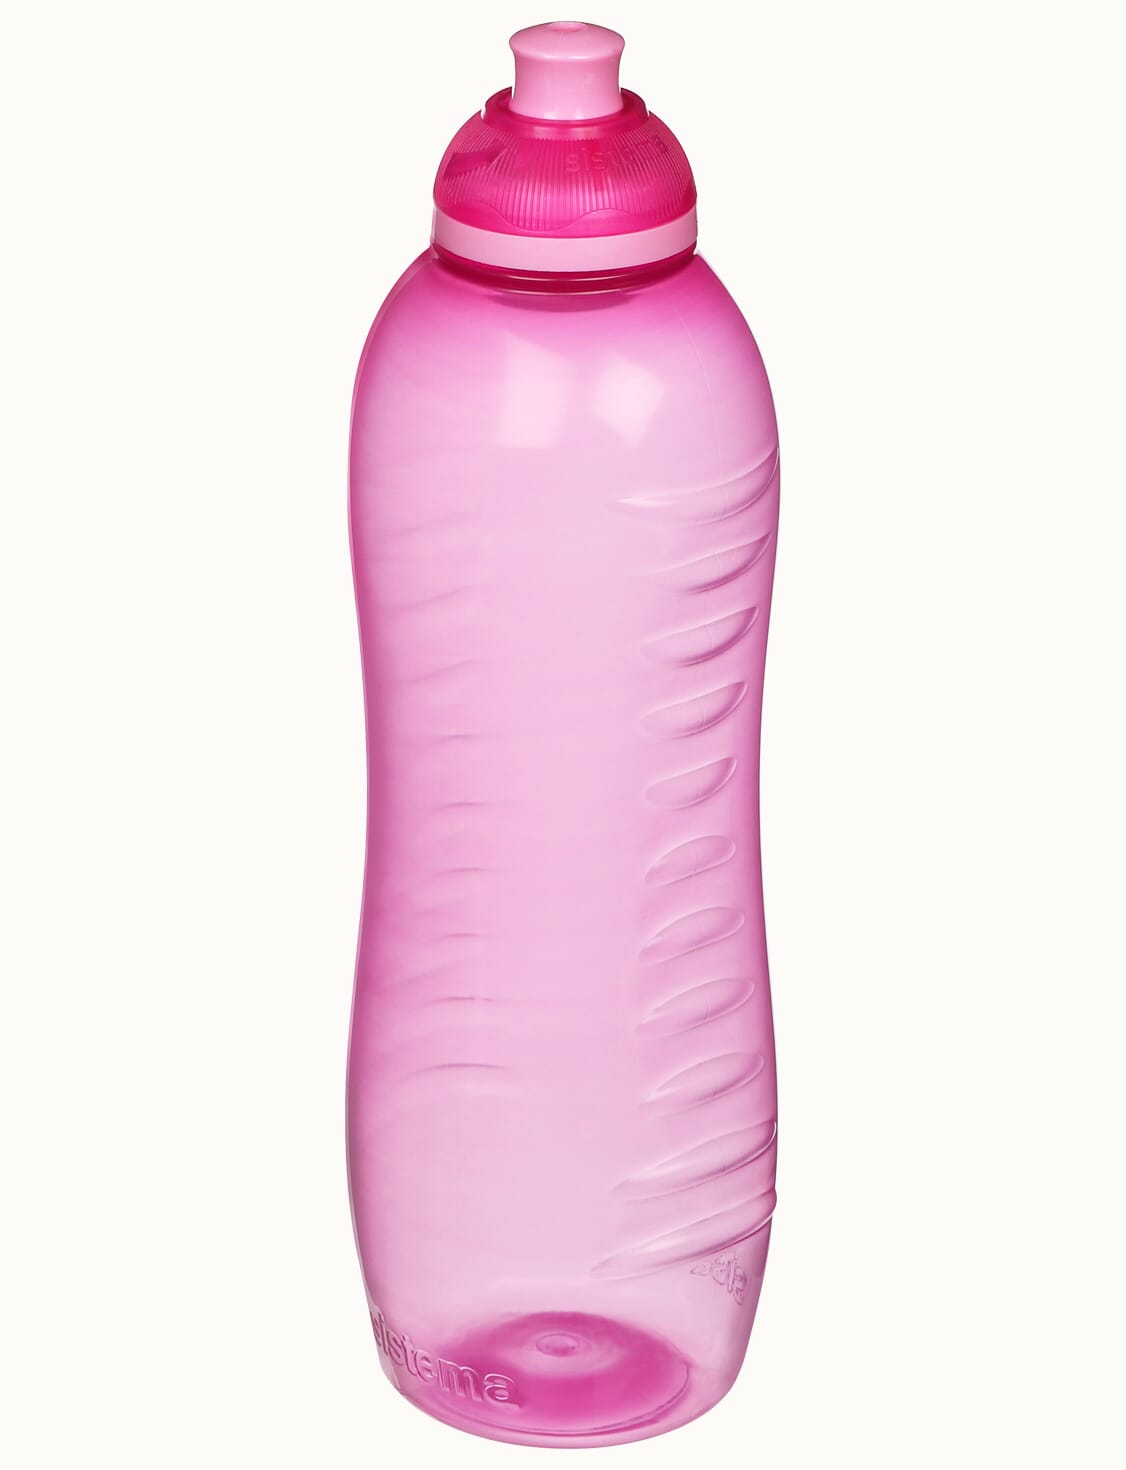 https://stergita.sirv.com/sistema/catalog/product/7/9/795_620ml_squeeze_lunch_nolabel_angle_pink.png?canvas.color=fcfbf8